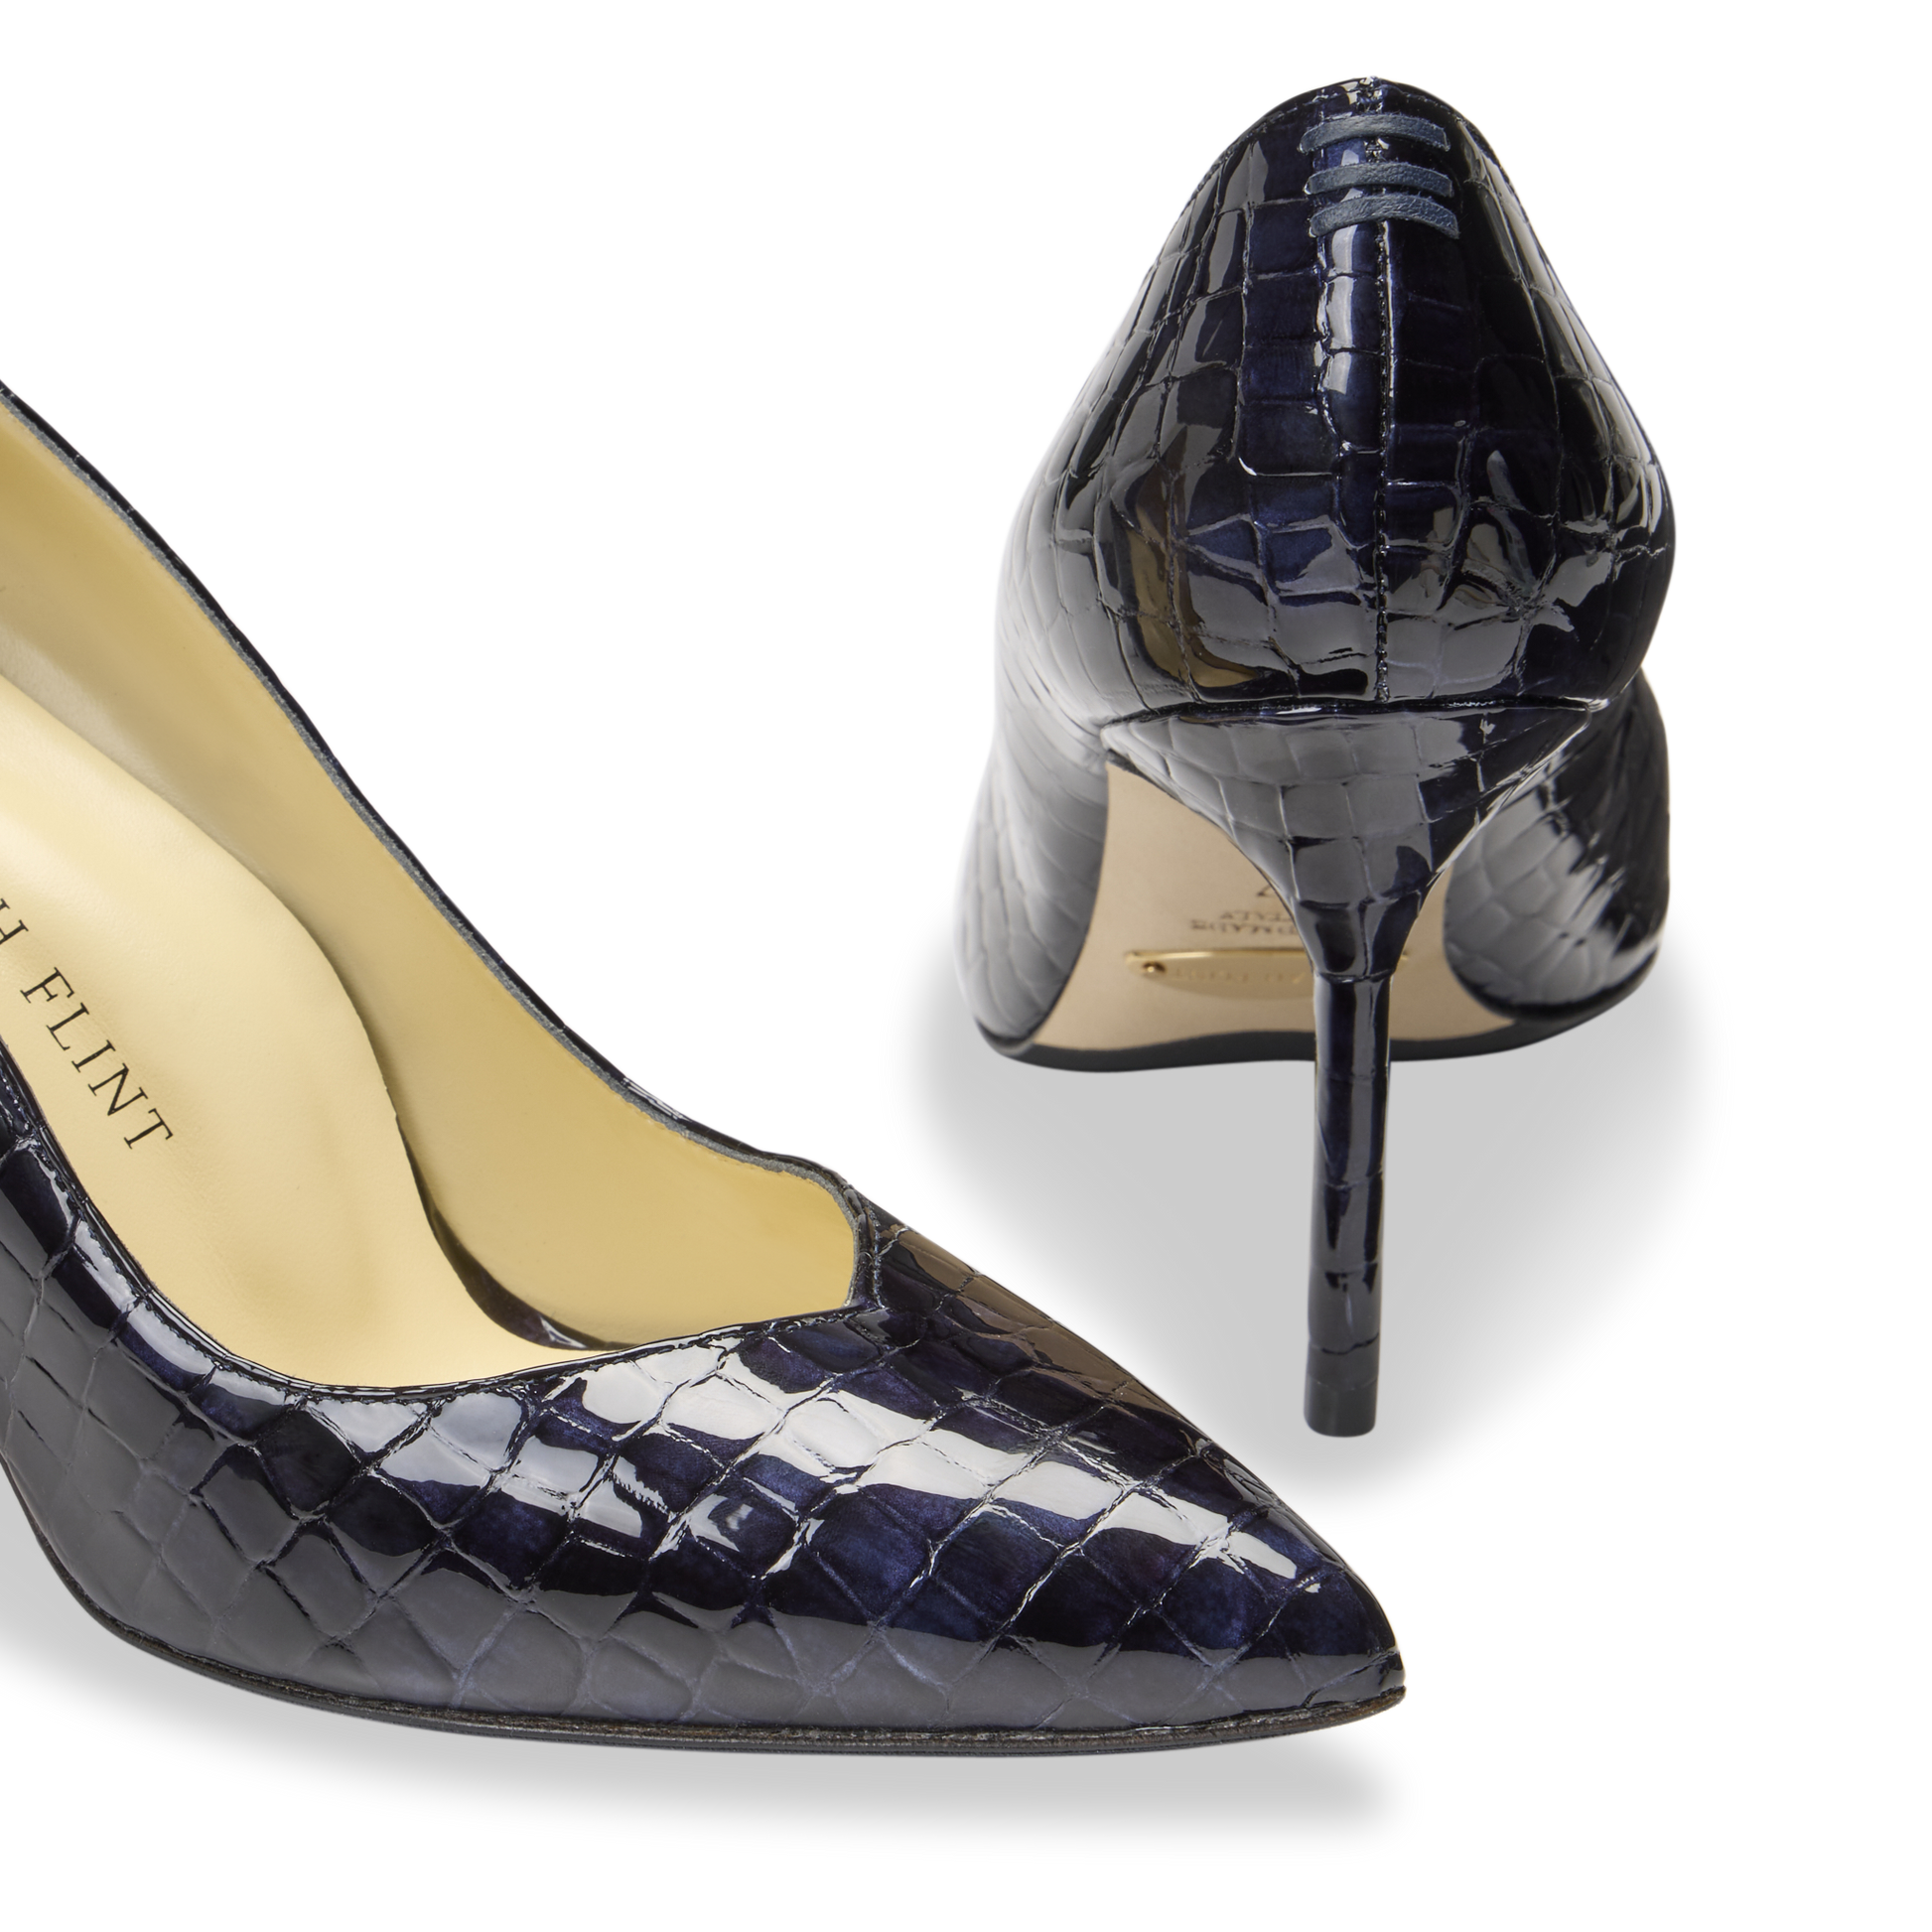 Perfect Pump 85 in Navy Croc Embossed Patent